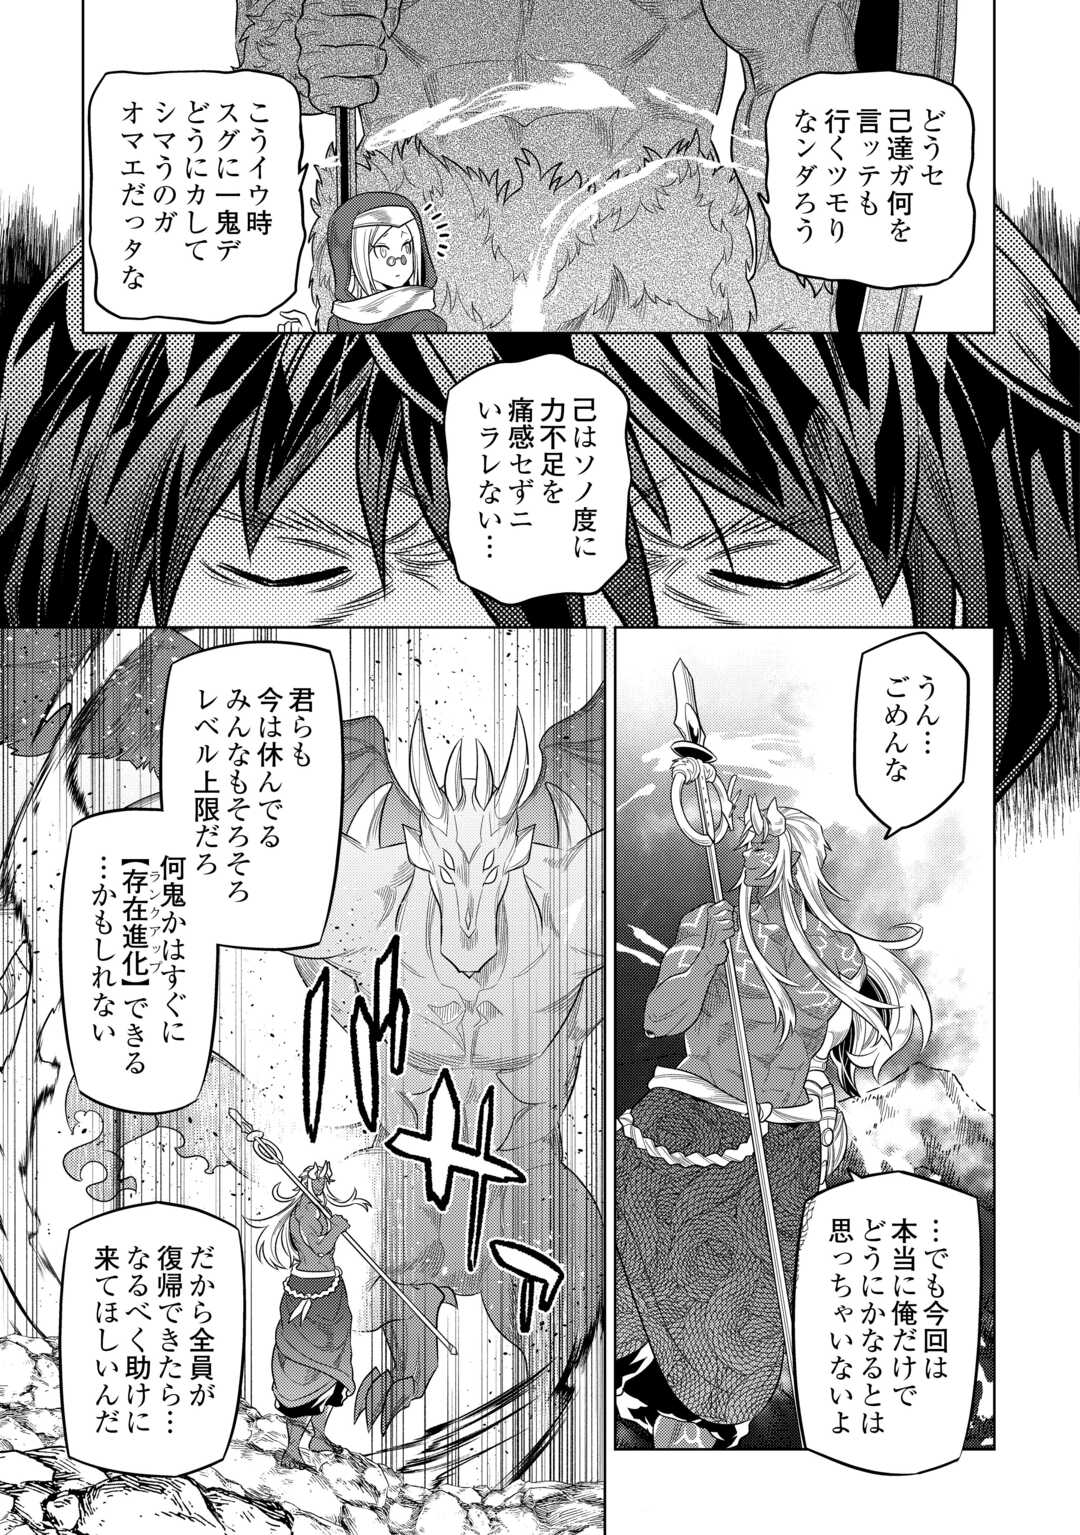 Re:Monster - Chapter 98 - Page 3